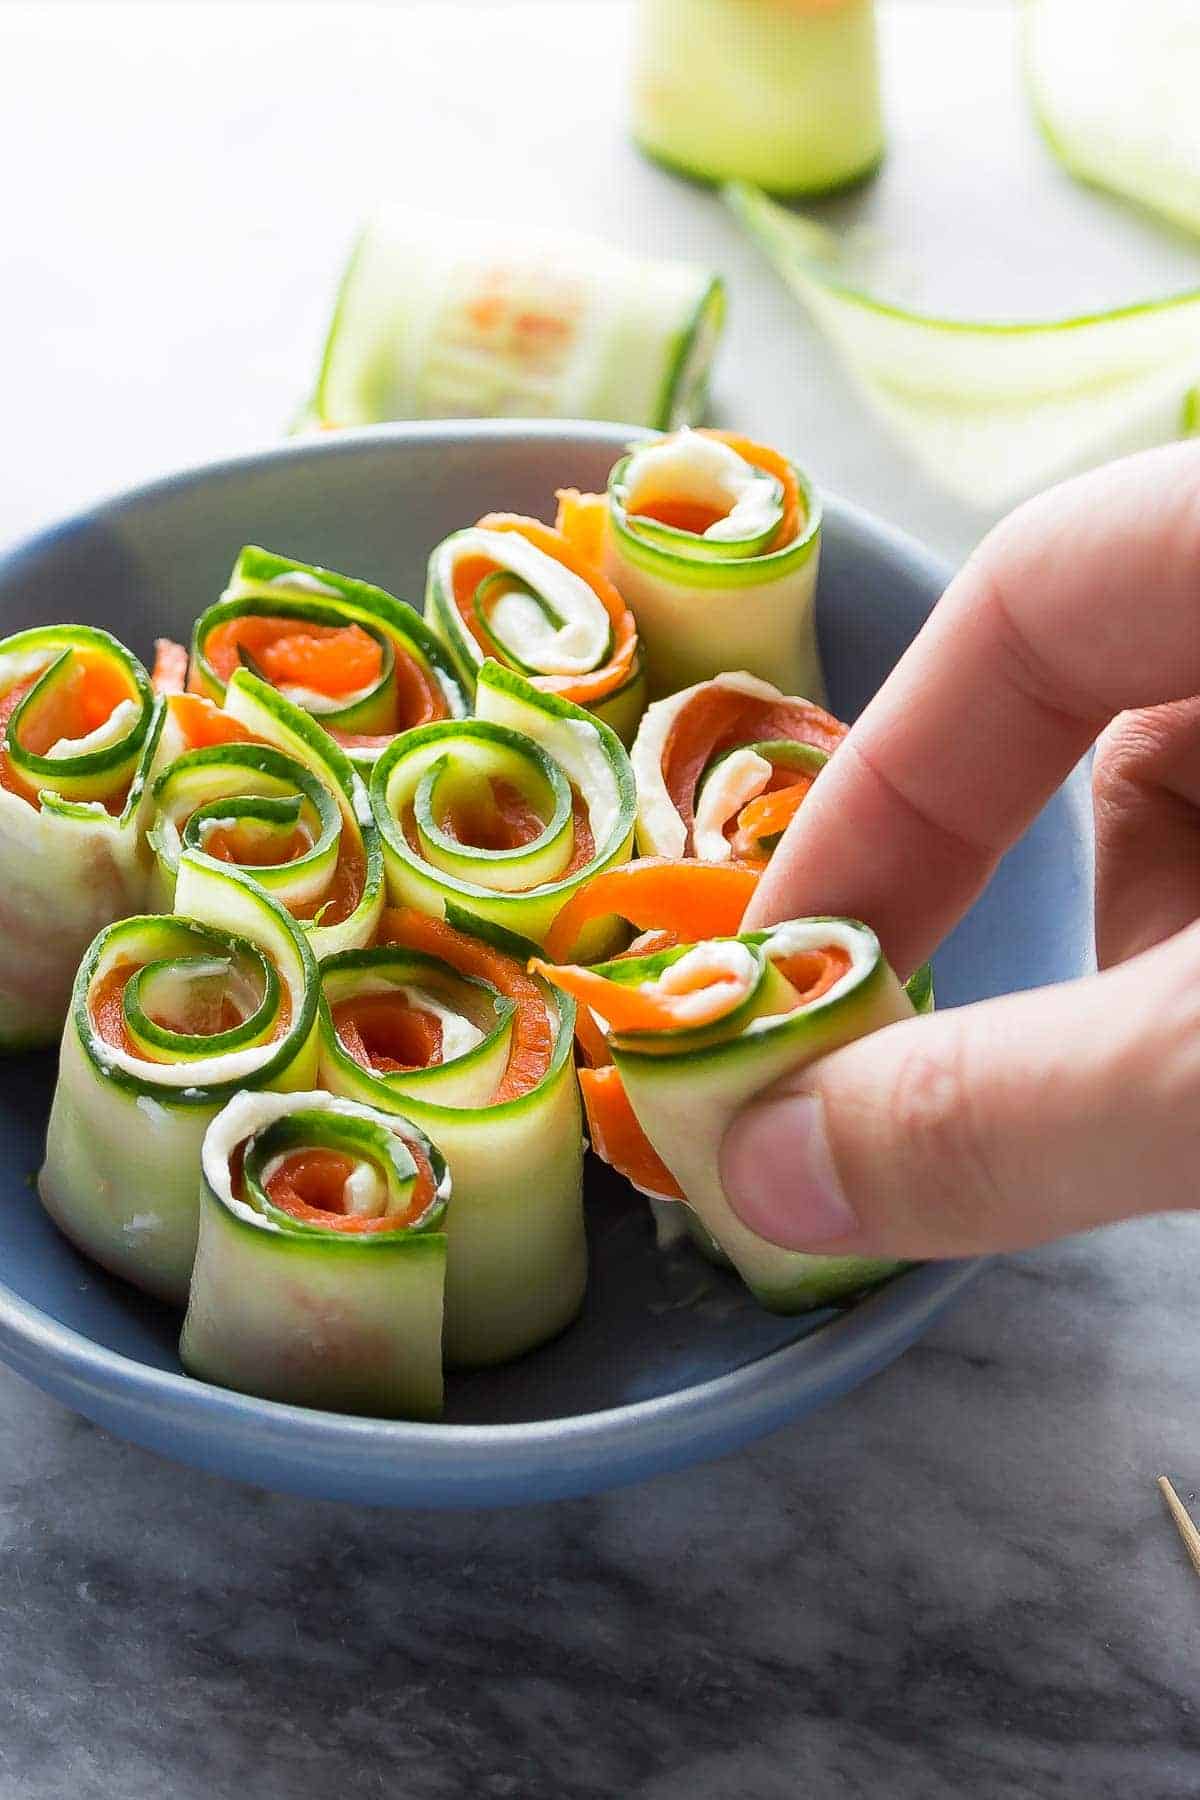 Smoked salmon cucumber roll-ups plated in a blue bowl